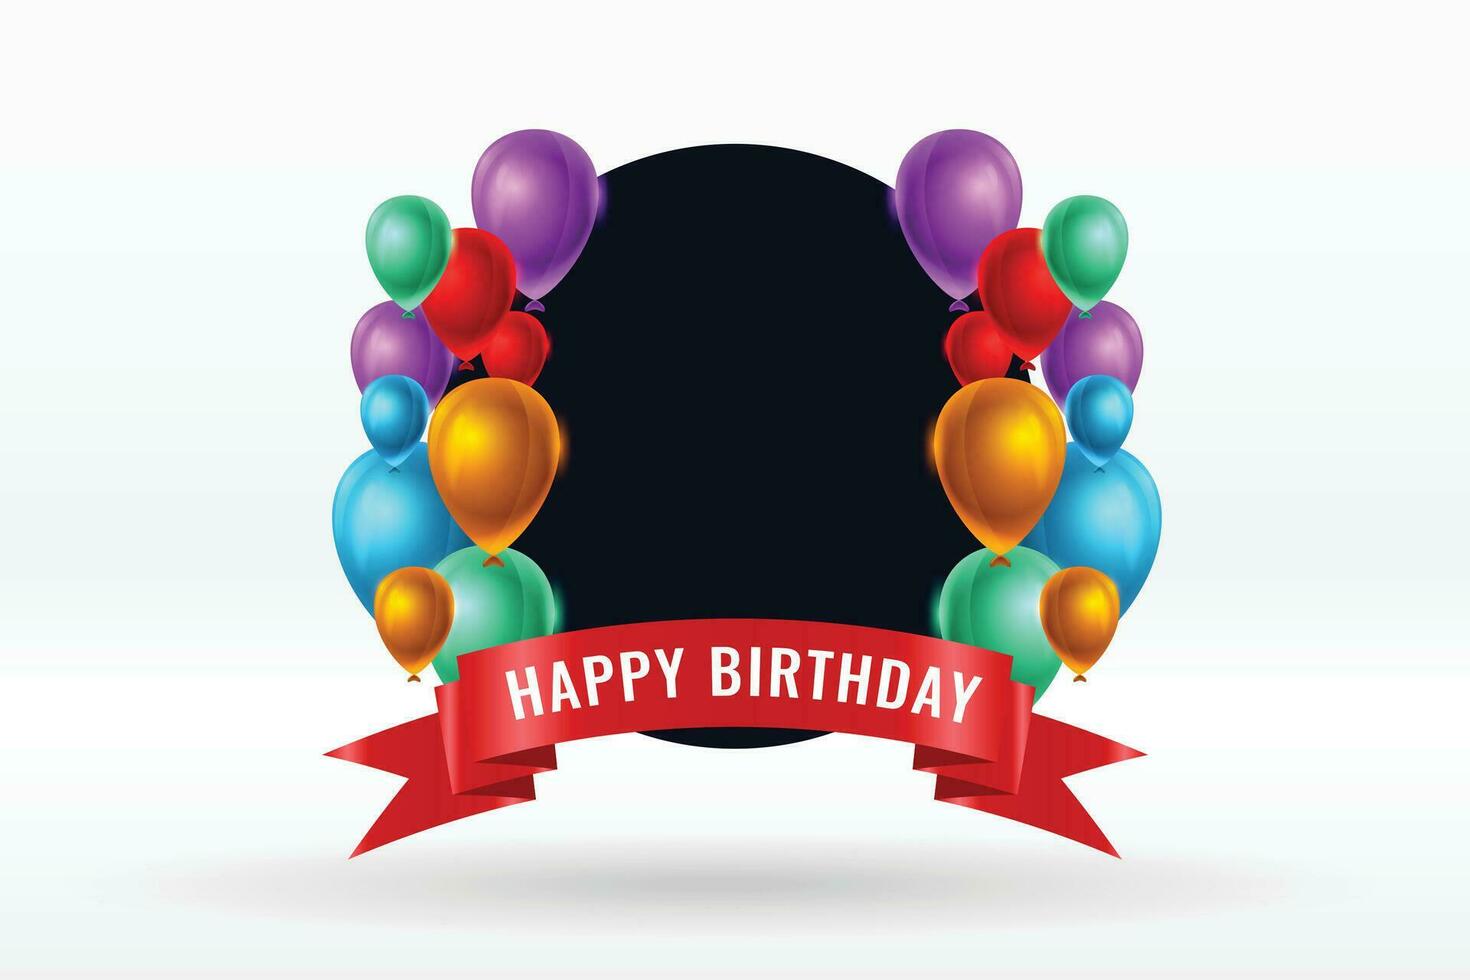 happy birthday realistic balloons and ribbons background vector